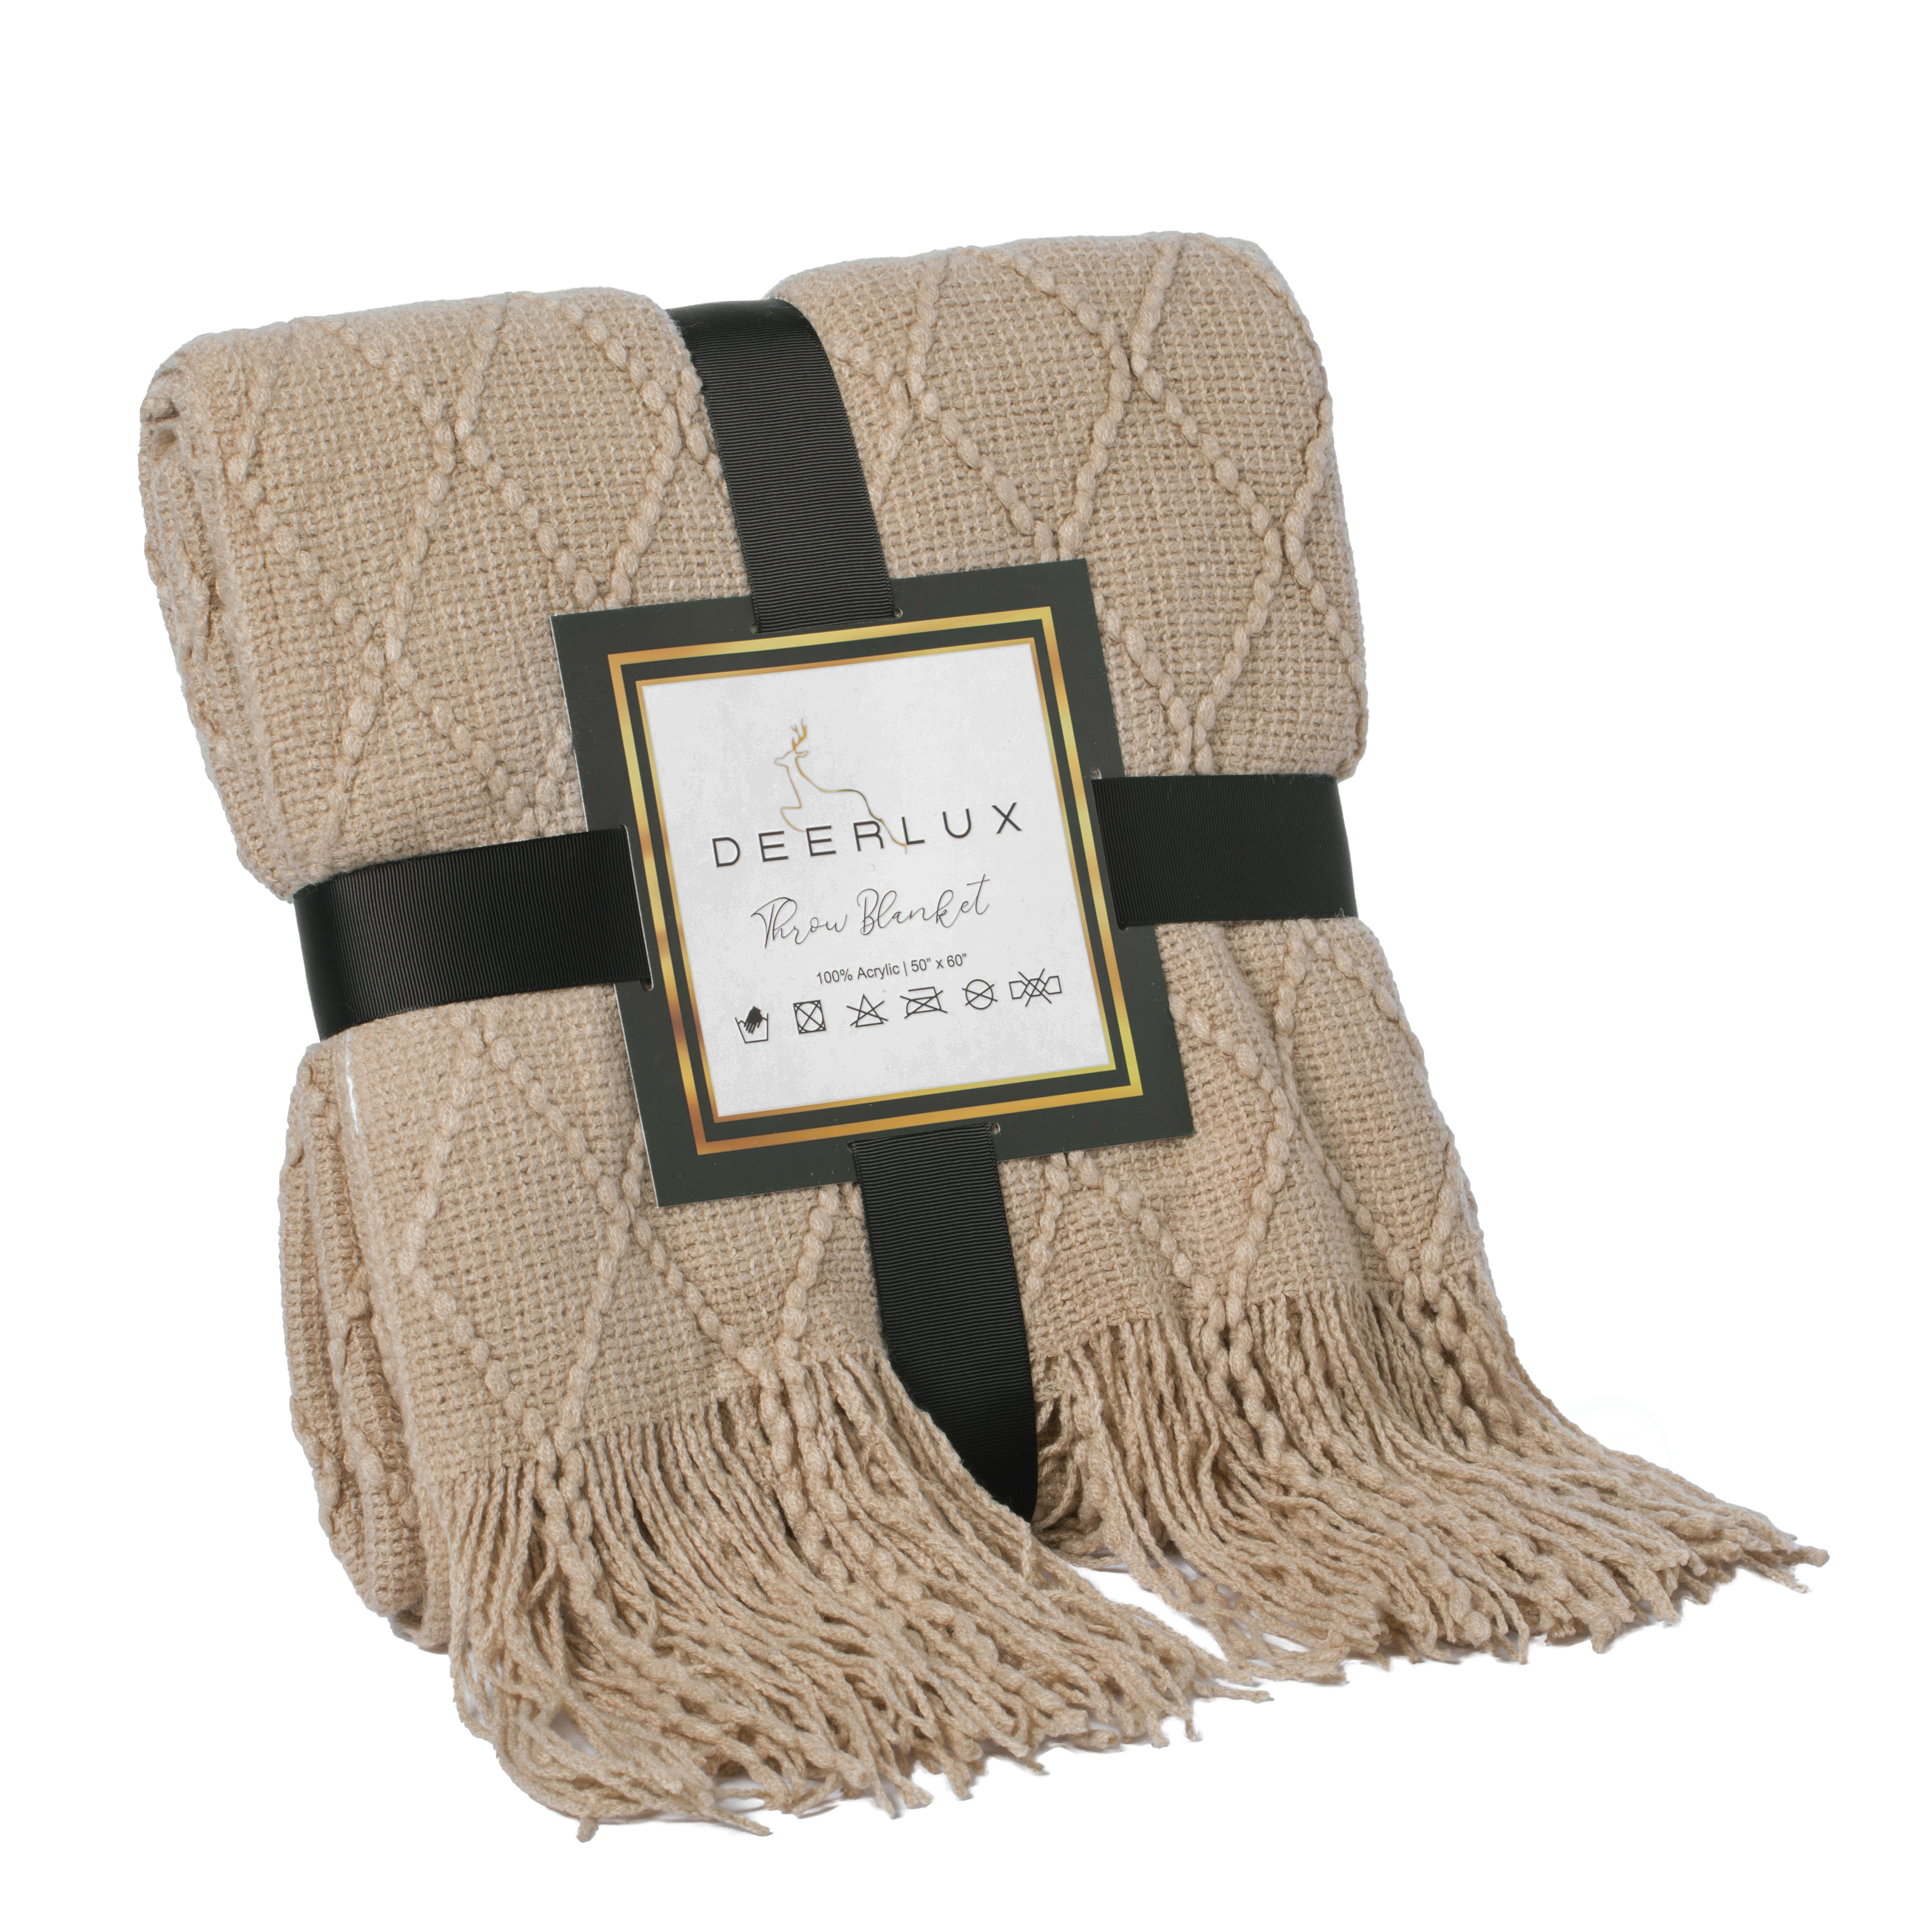 Decorative Throw Blanket - 50x60in Soft Knit With Delightful Fringe Edges For A Sophisticated And Cozy Touch To Your Living Space Lightwe -